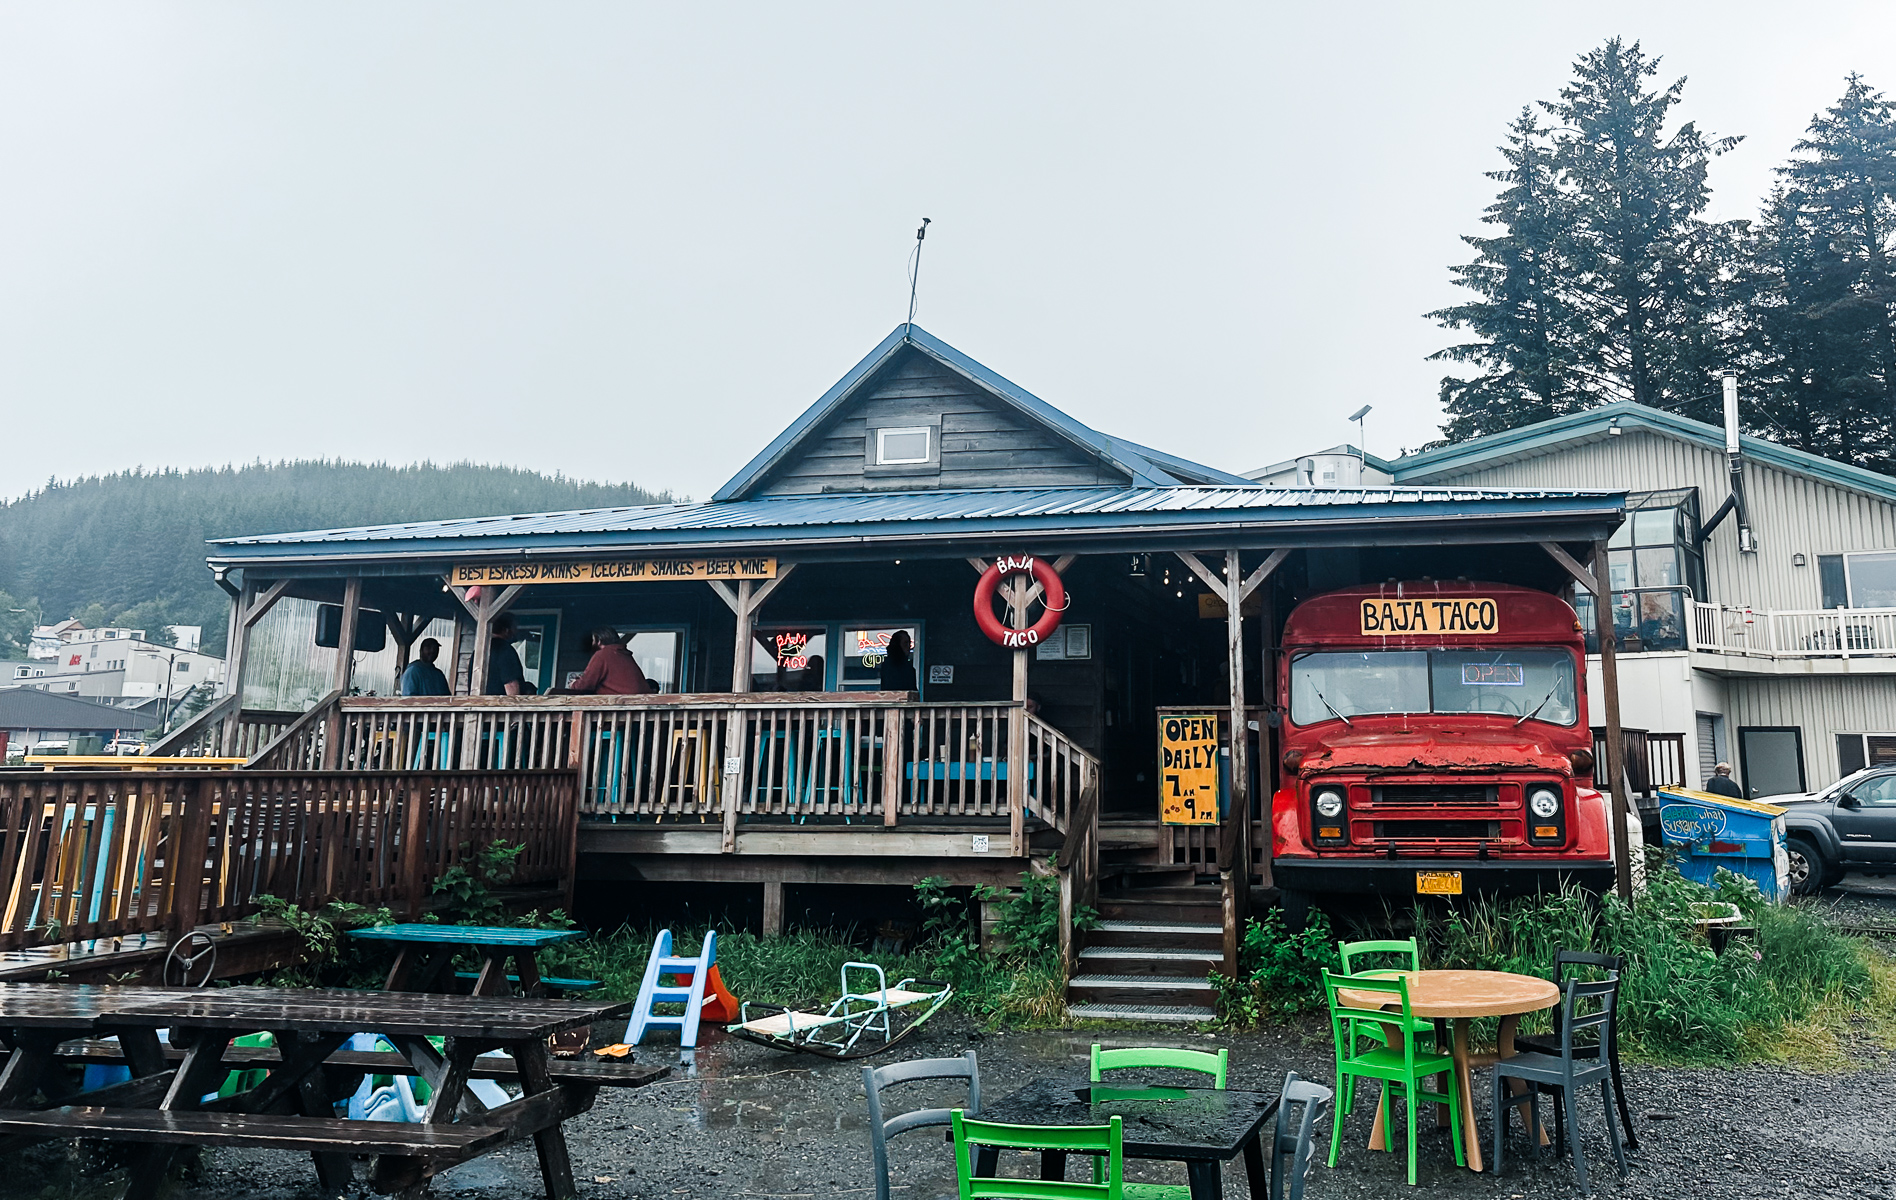 baja tacos restaurant in cordova alaska red school bus blue roof building various chairs around tables